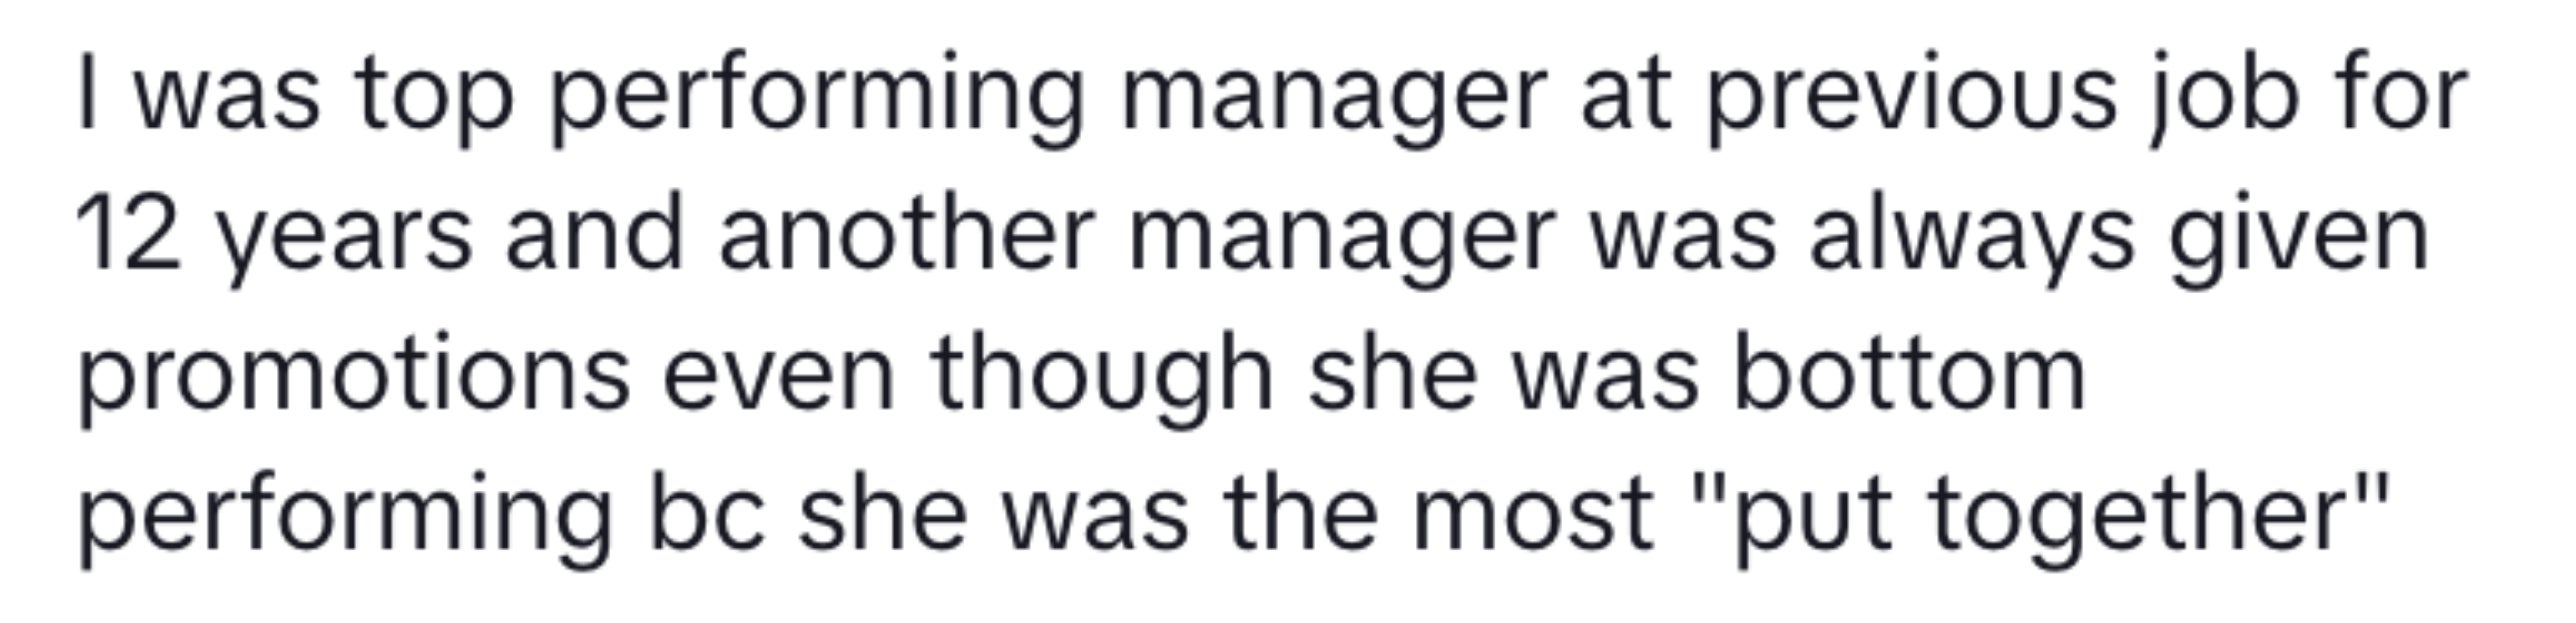 Text from an online post with a person expressing they were a top performing manager but weren&#x27;t promoted in favor of another